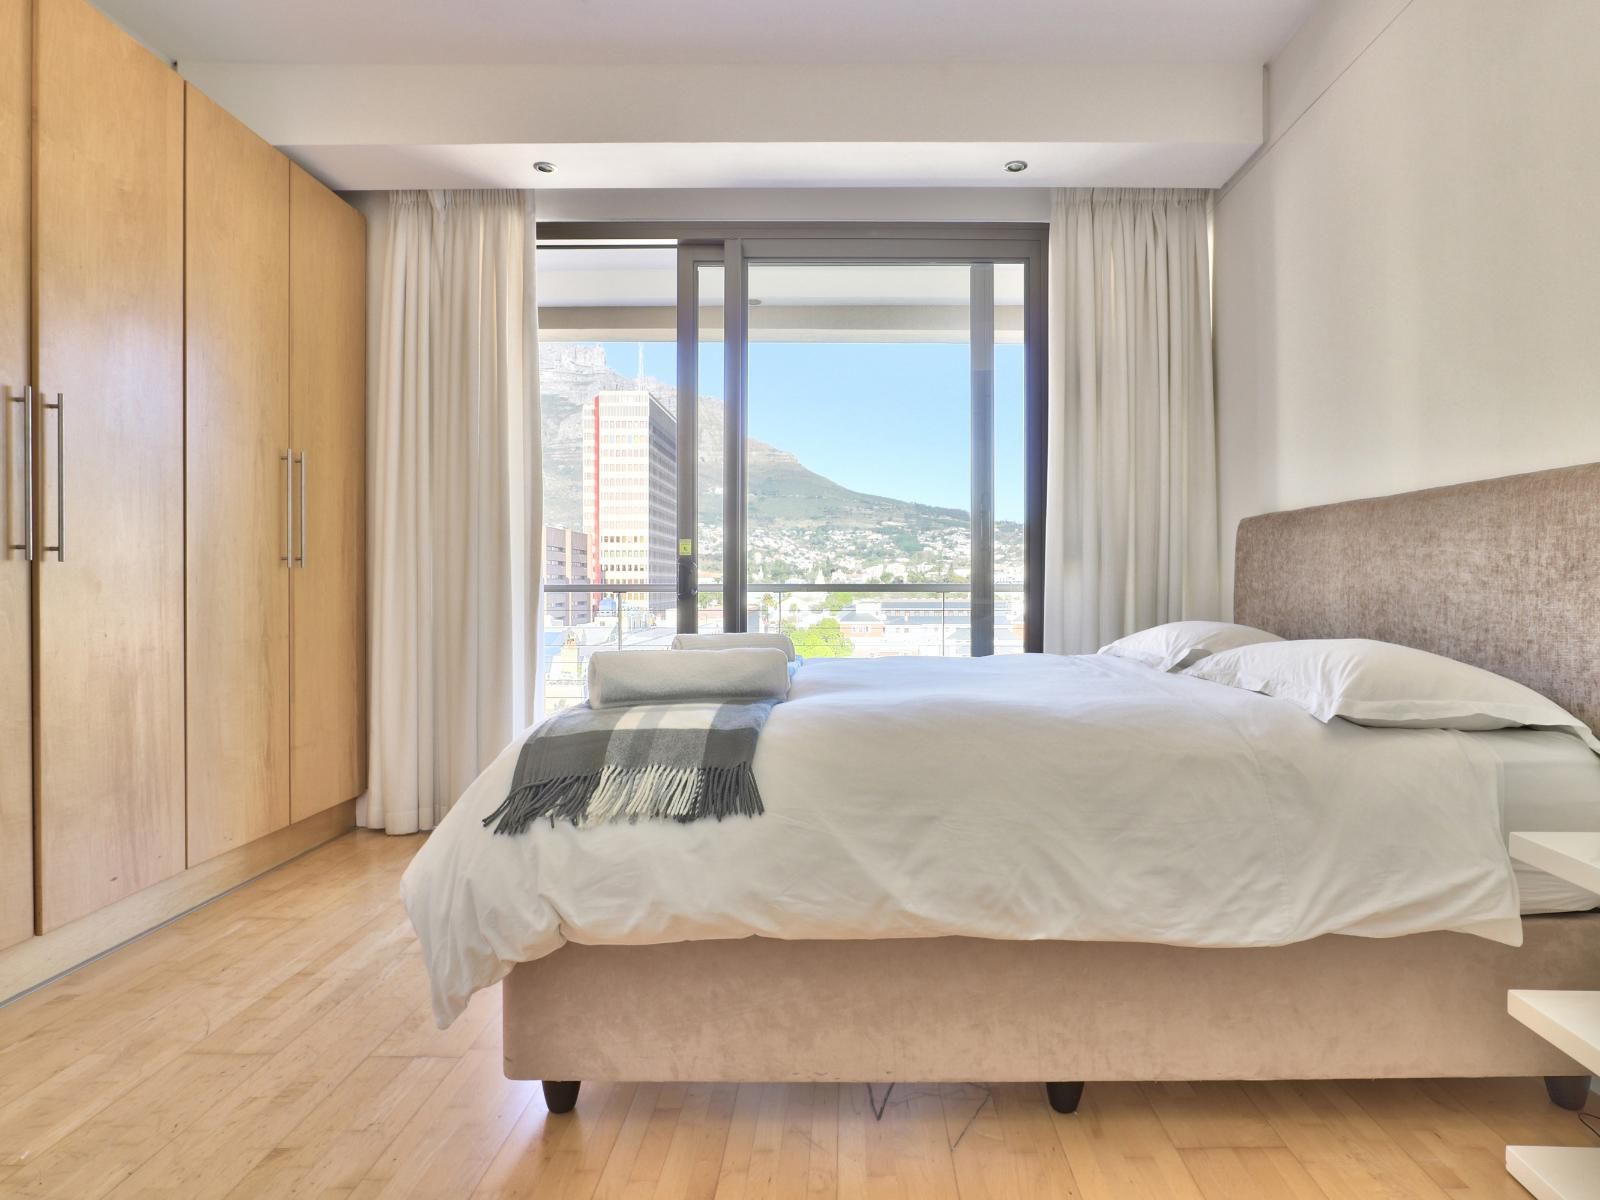 Avenue One Apartments Cape Town City Centre Cape Town Western Cape South Africa Bedroom